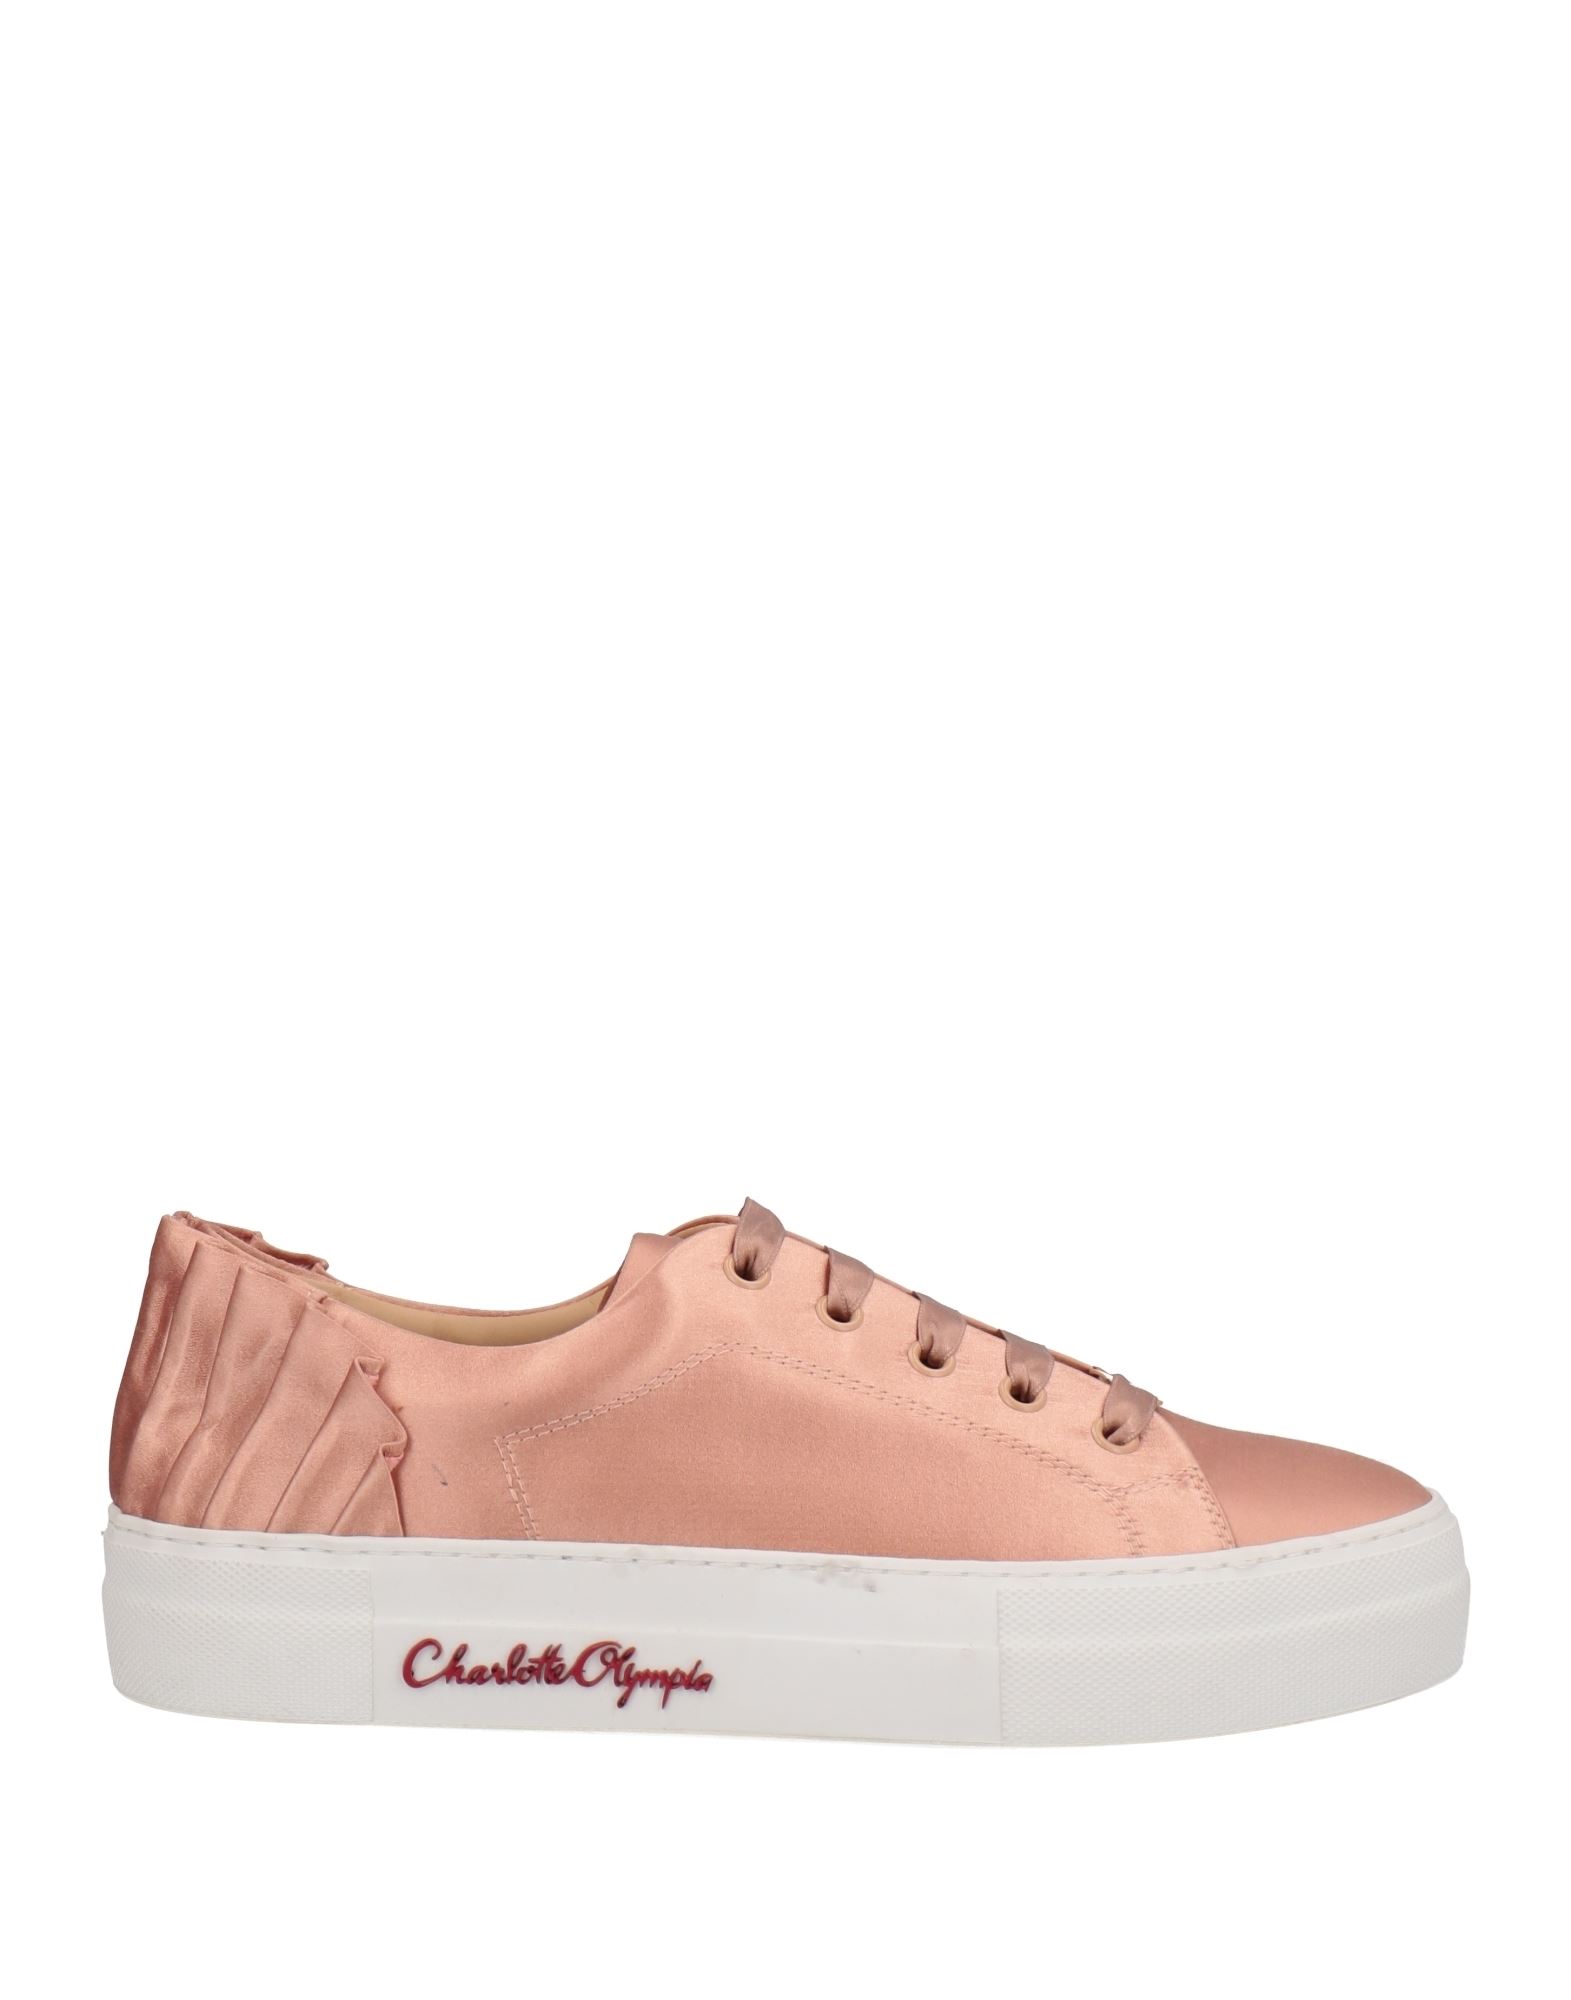 Charlotte Olympia Sneakers In Blush